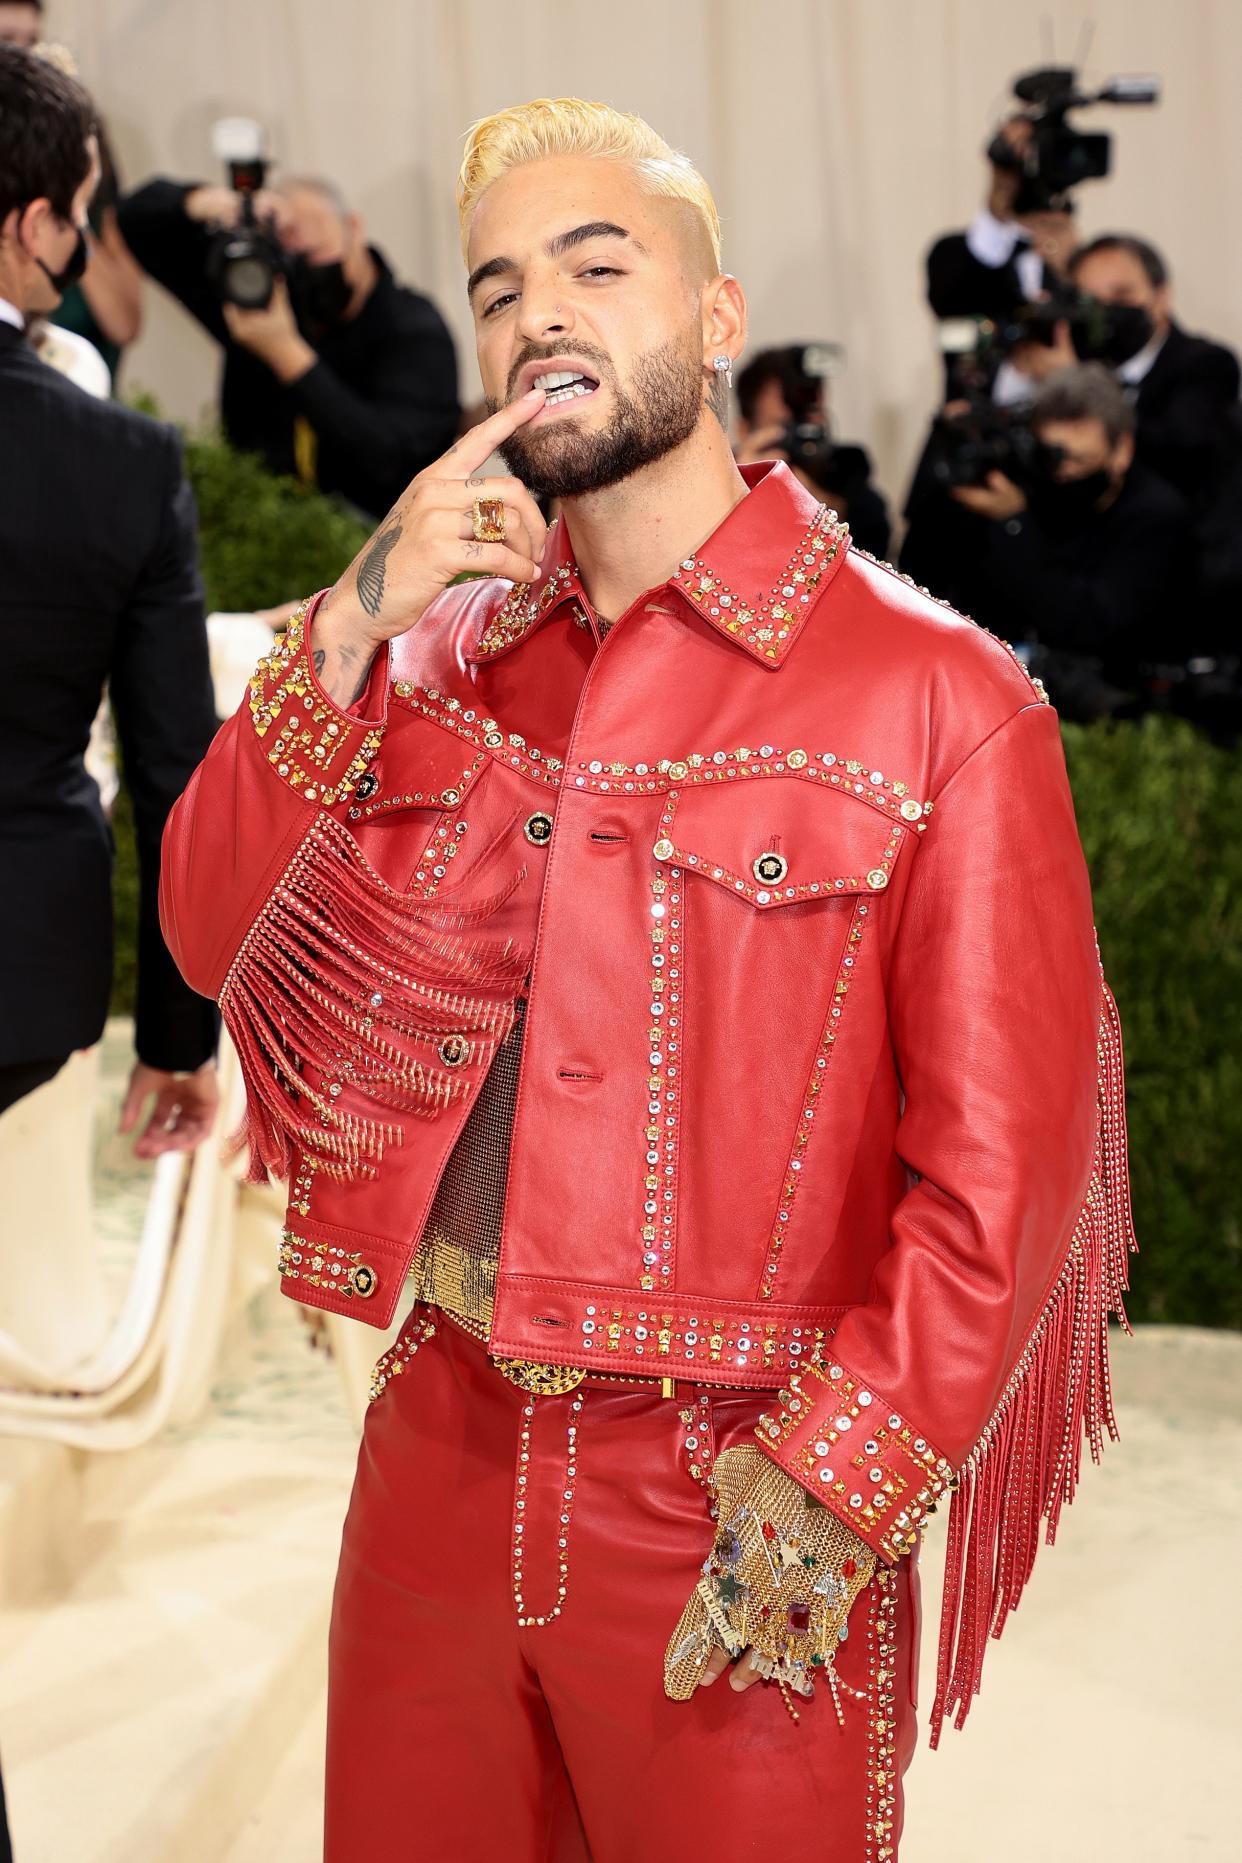 Maluma attends The 2021 Met Gala Celebrating In America: A Lexicon Of Fashion at Metropolitan Museum of Art on Sept. 13, 2021 in New York.